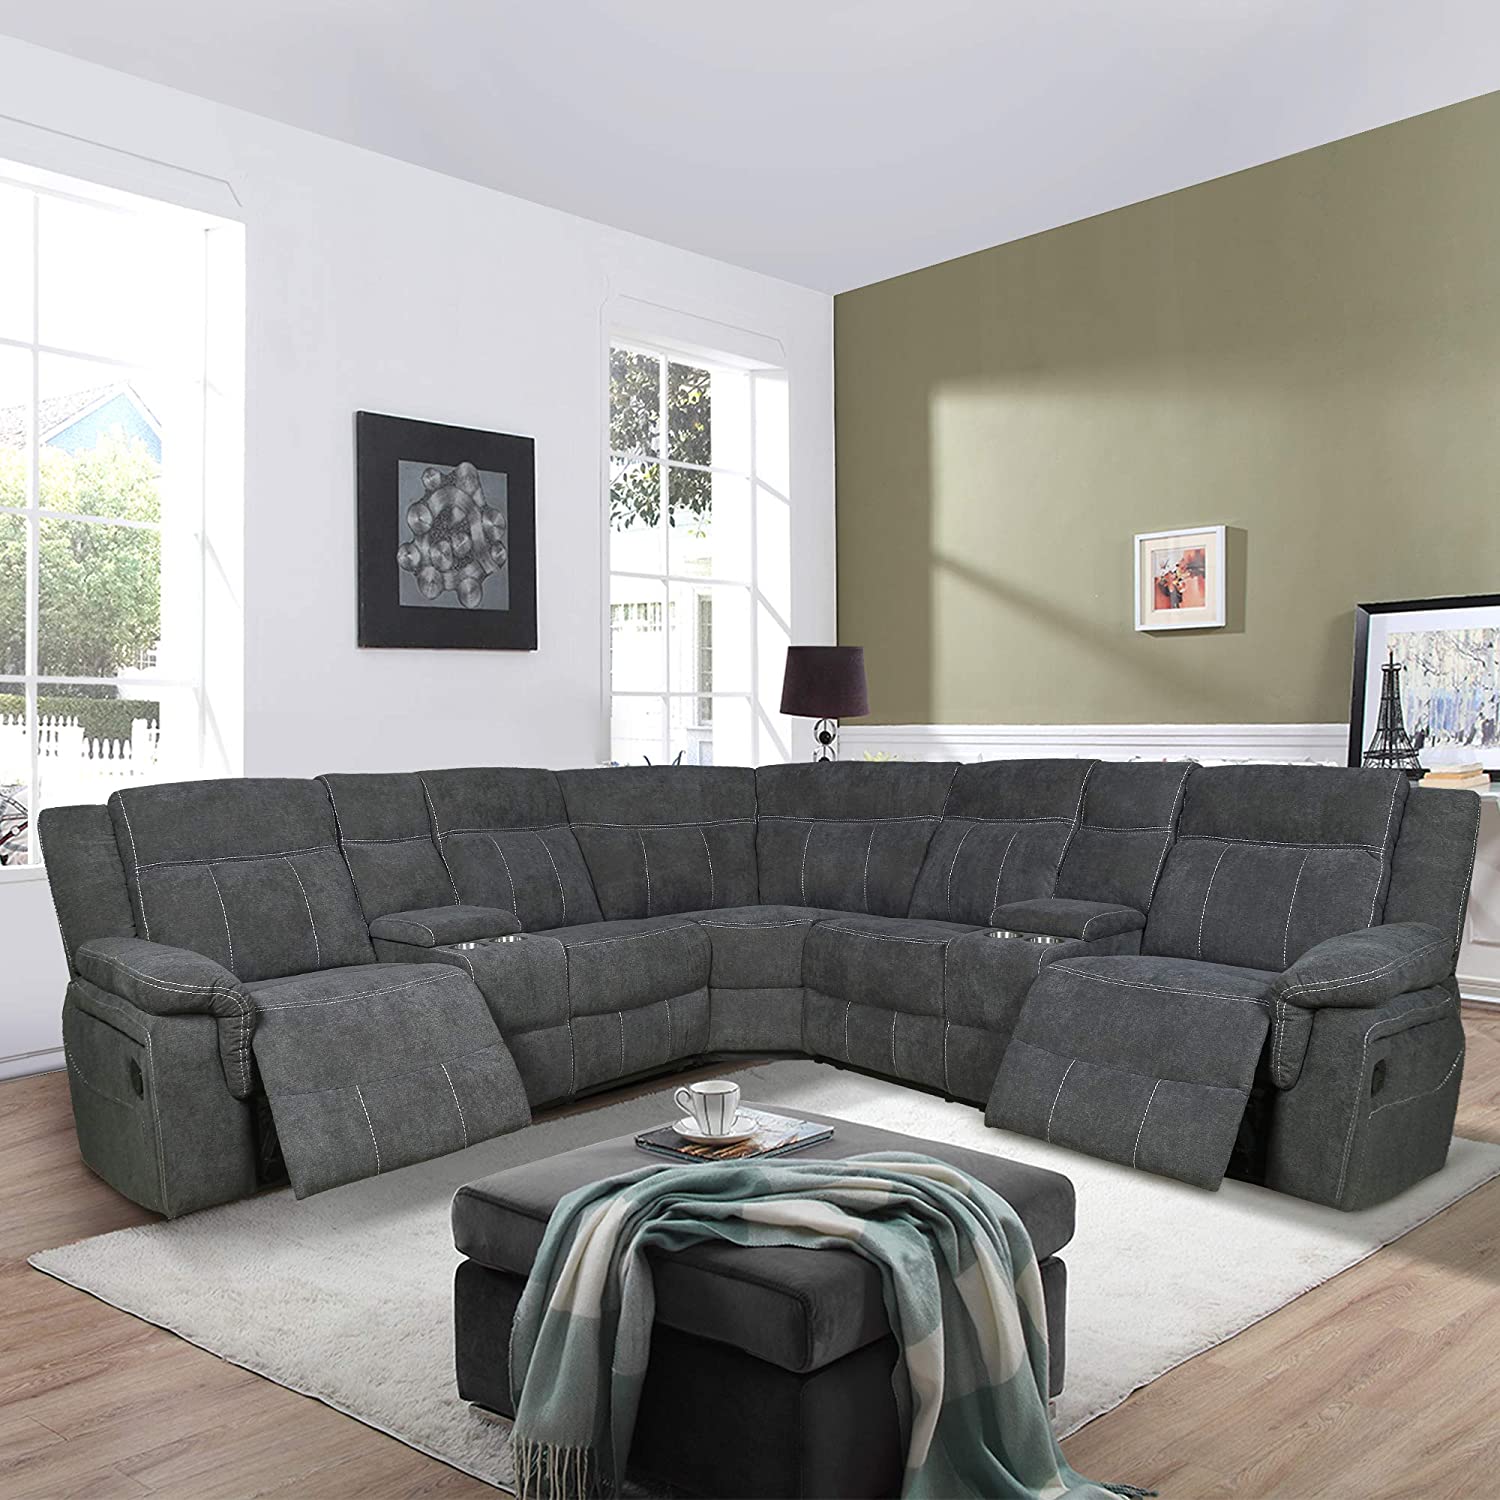 BEST RECLINING SECTIONAL COUCHES FOR LIVING ROOM